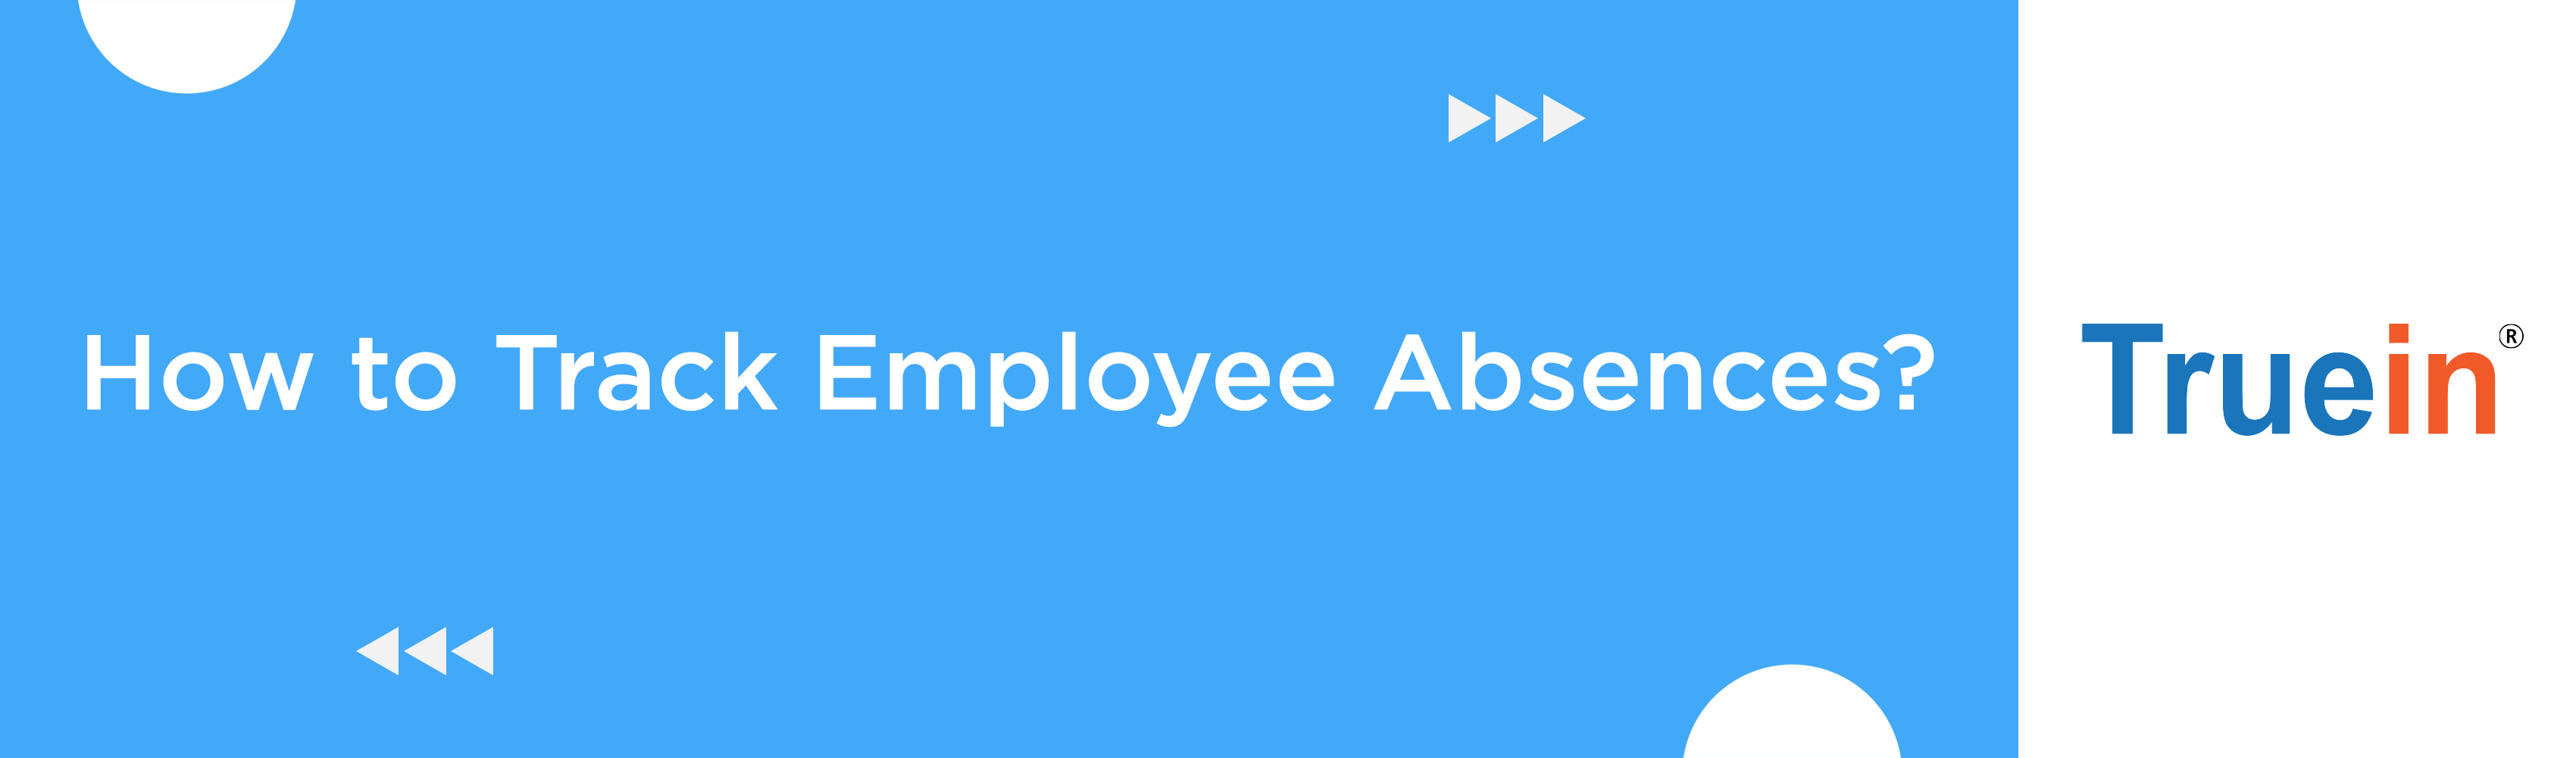 How to Track Employee Absences?